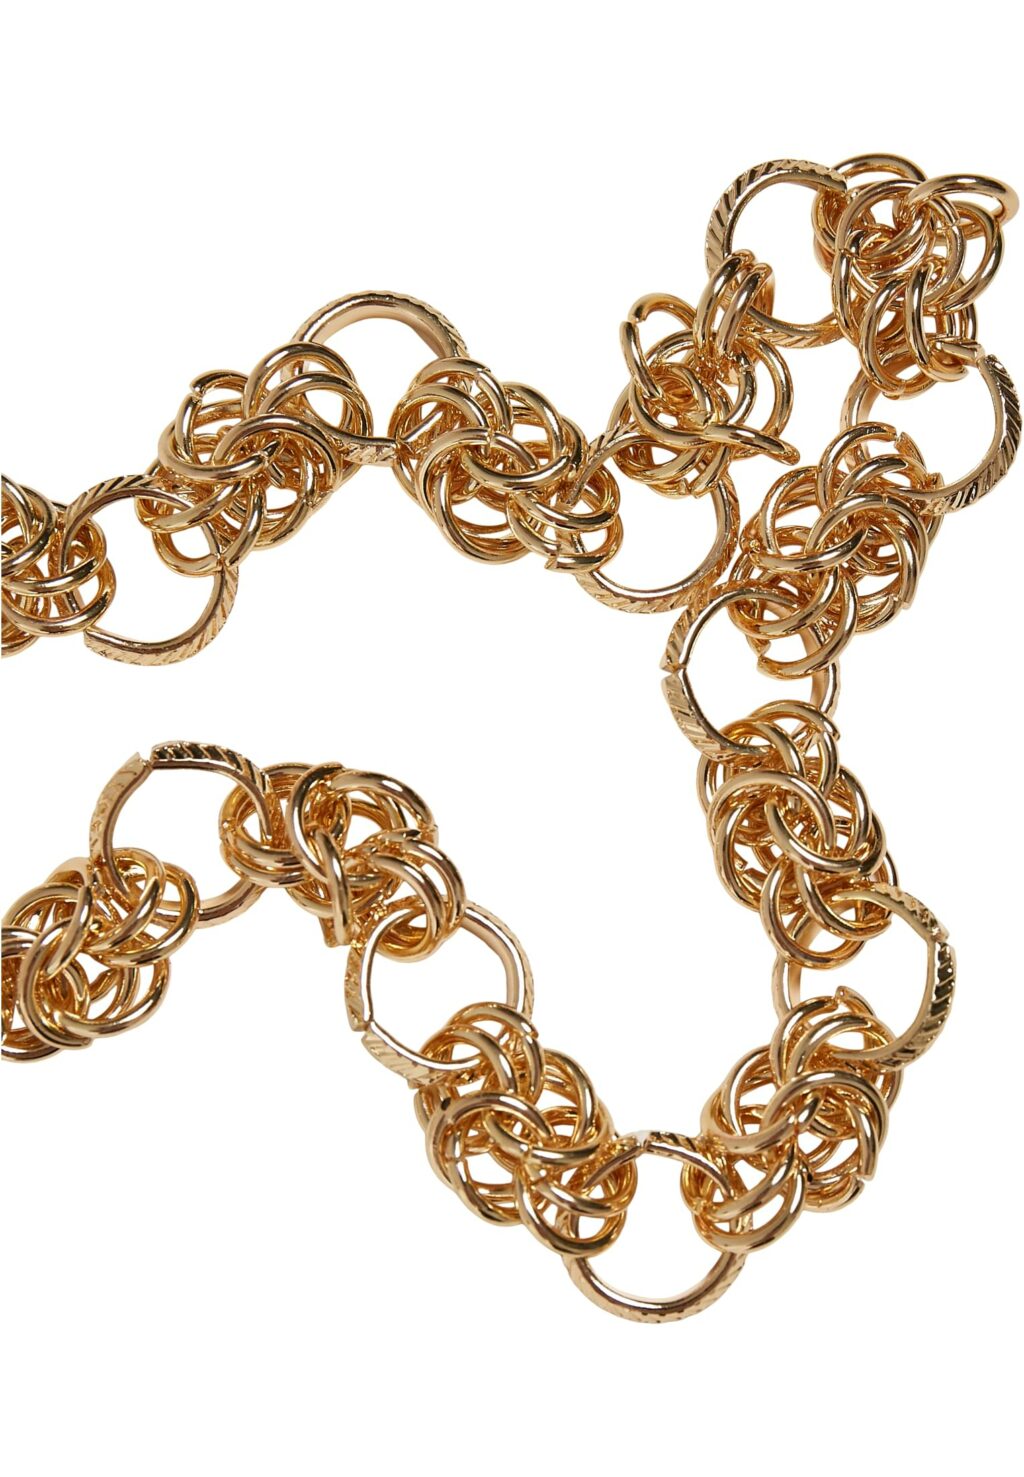 Multiring Necklace gold one TB4824